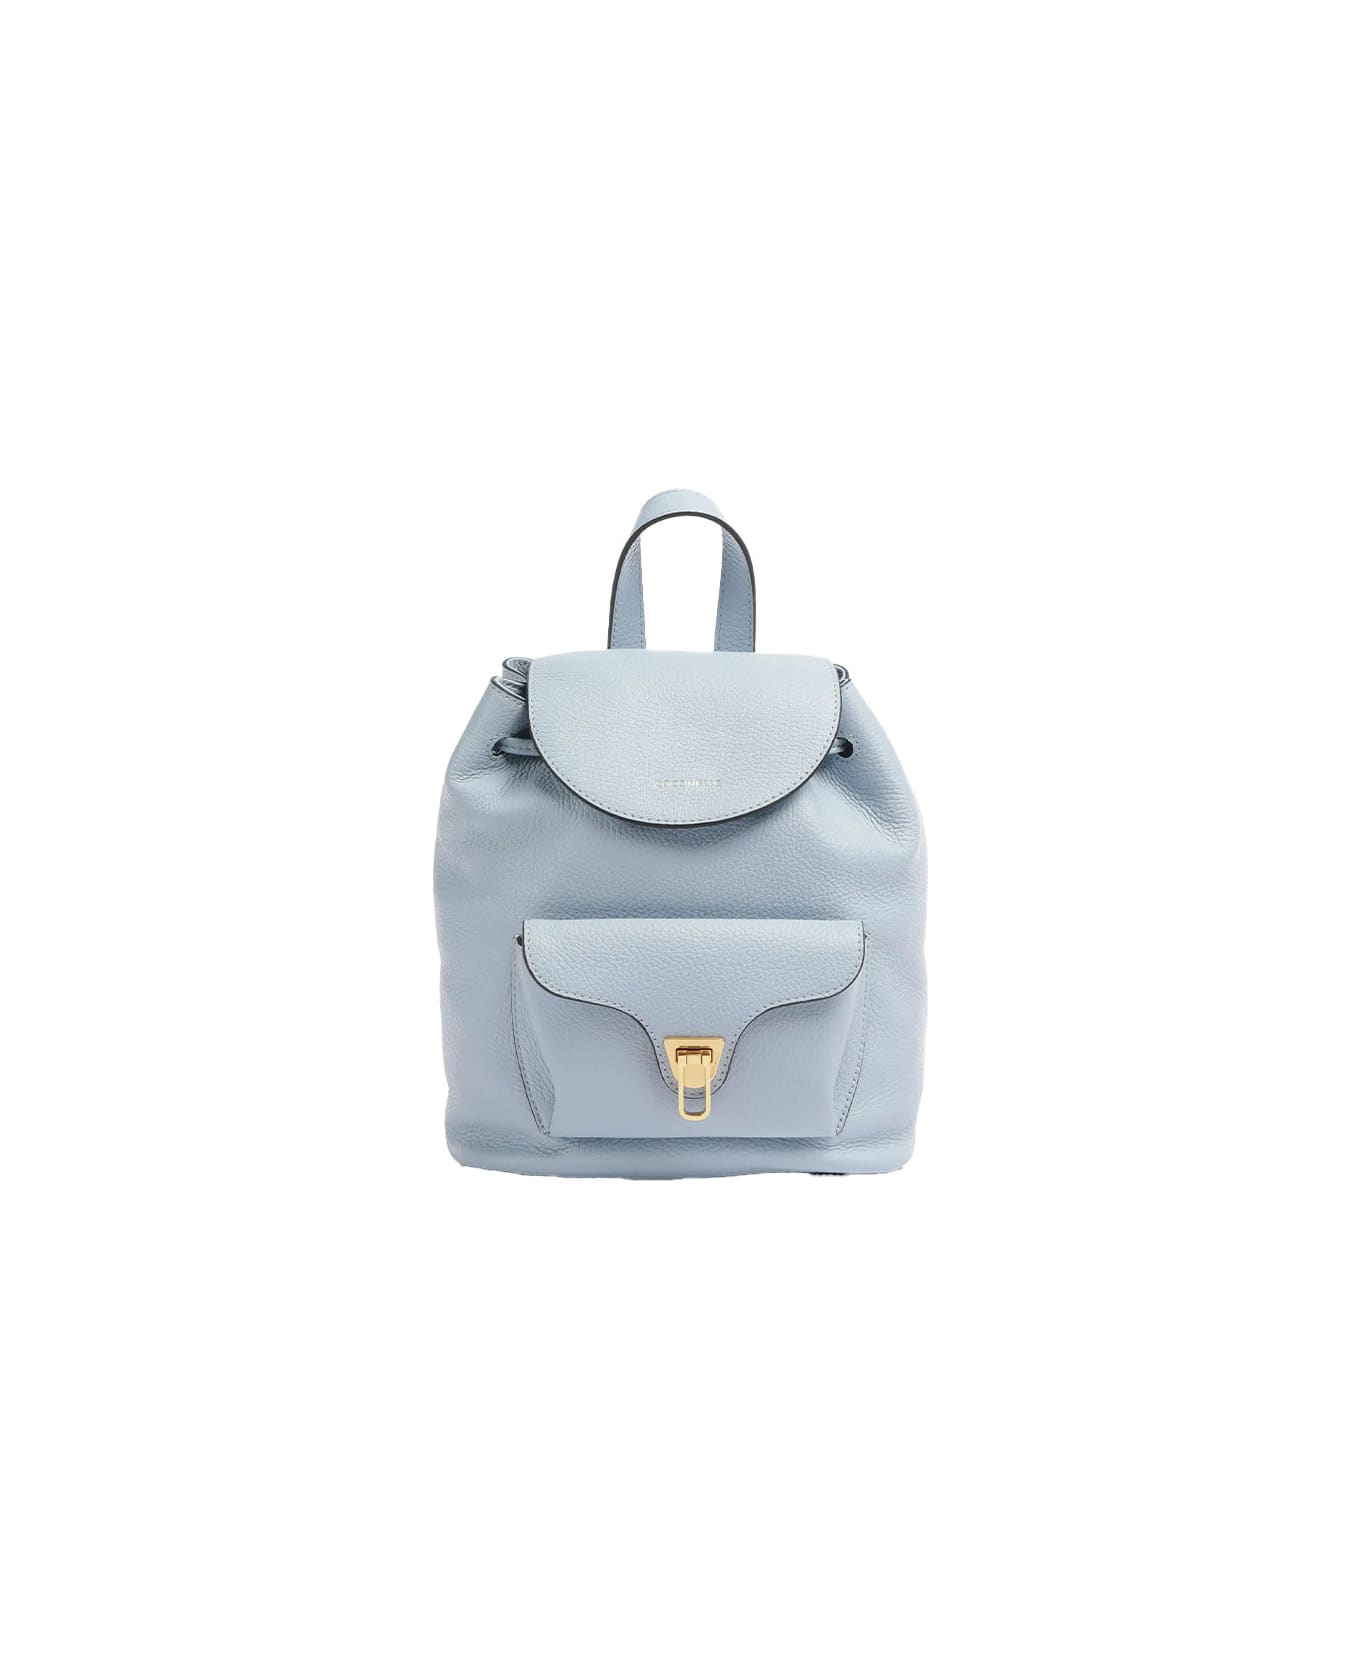 Coccinelle Beat Soft Backpack In Leather - Mist blue バックパック